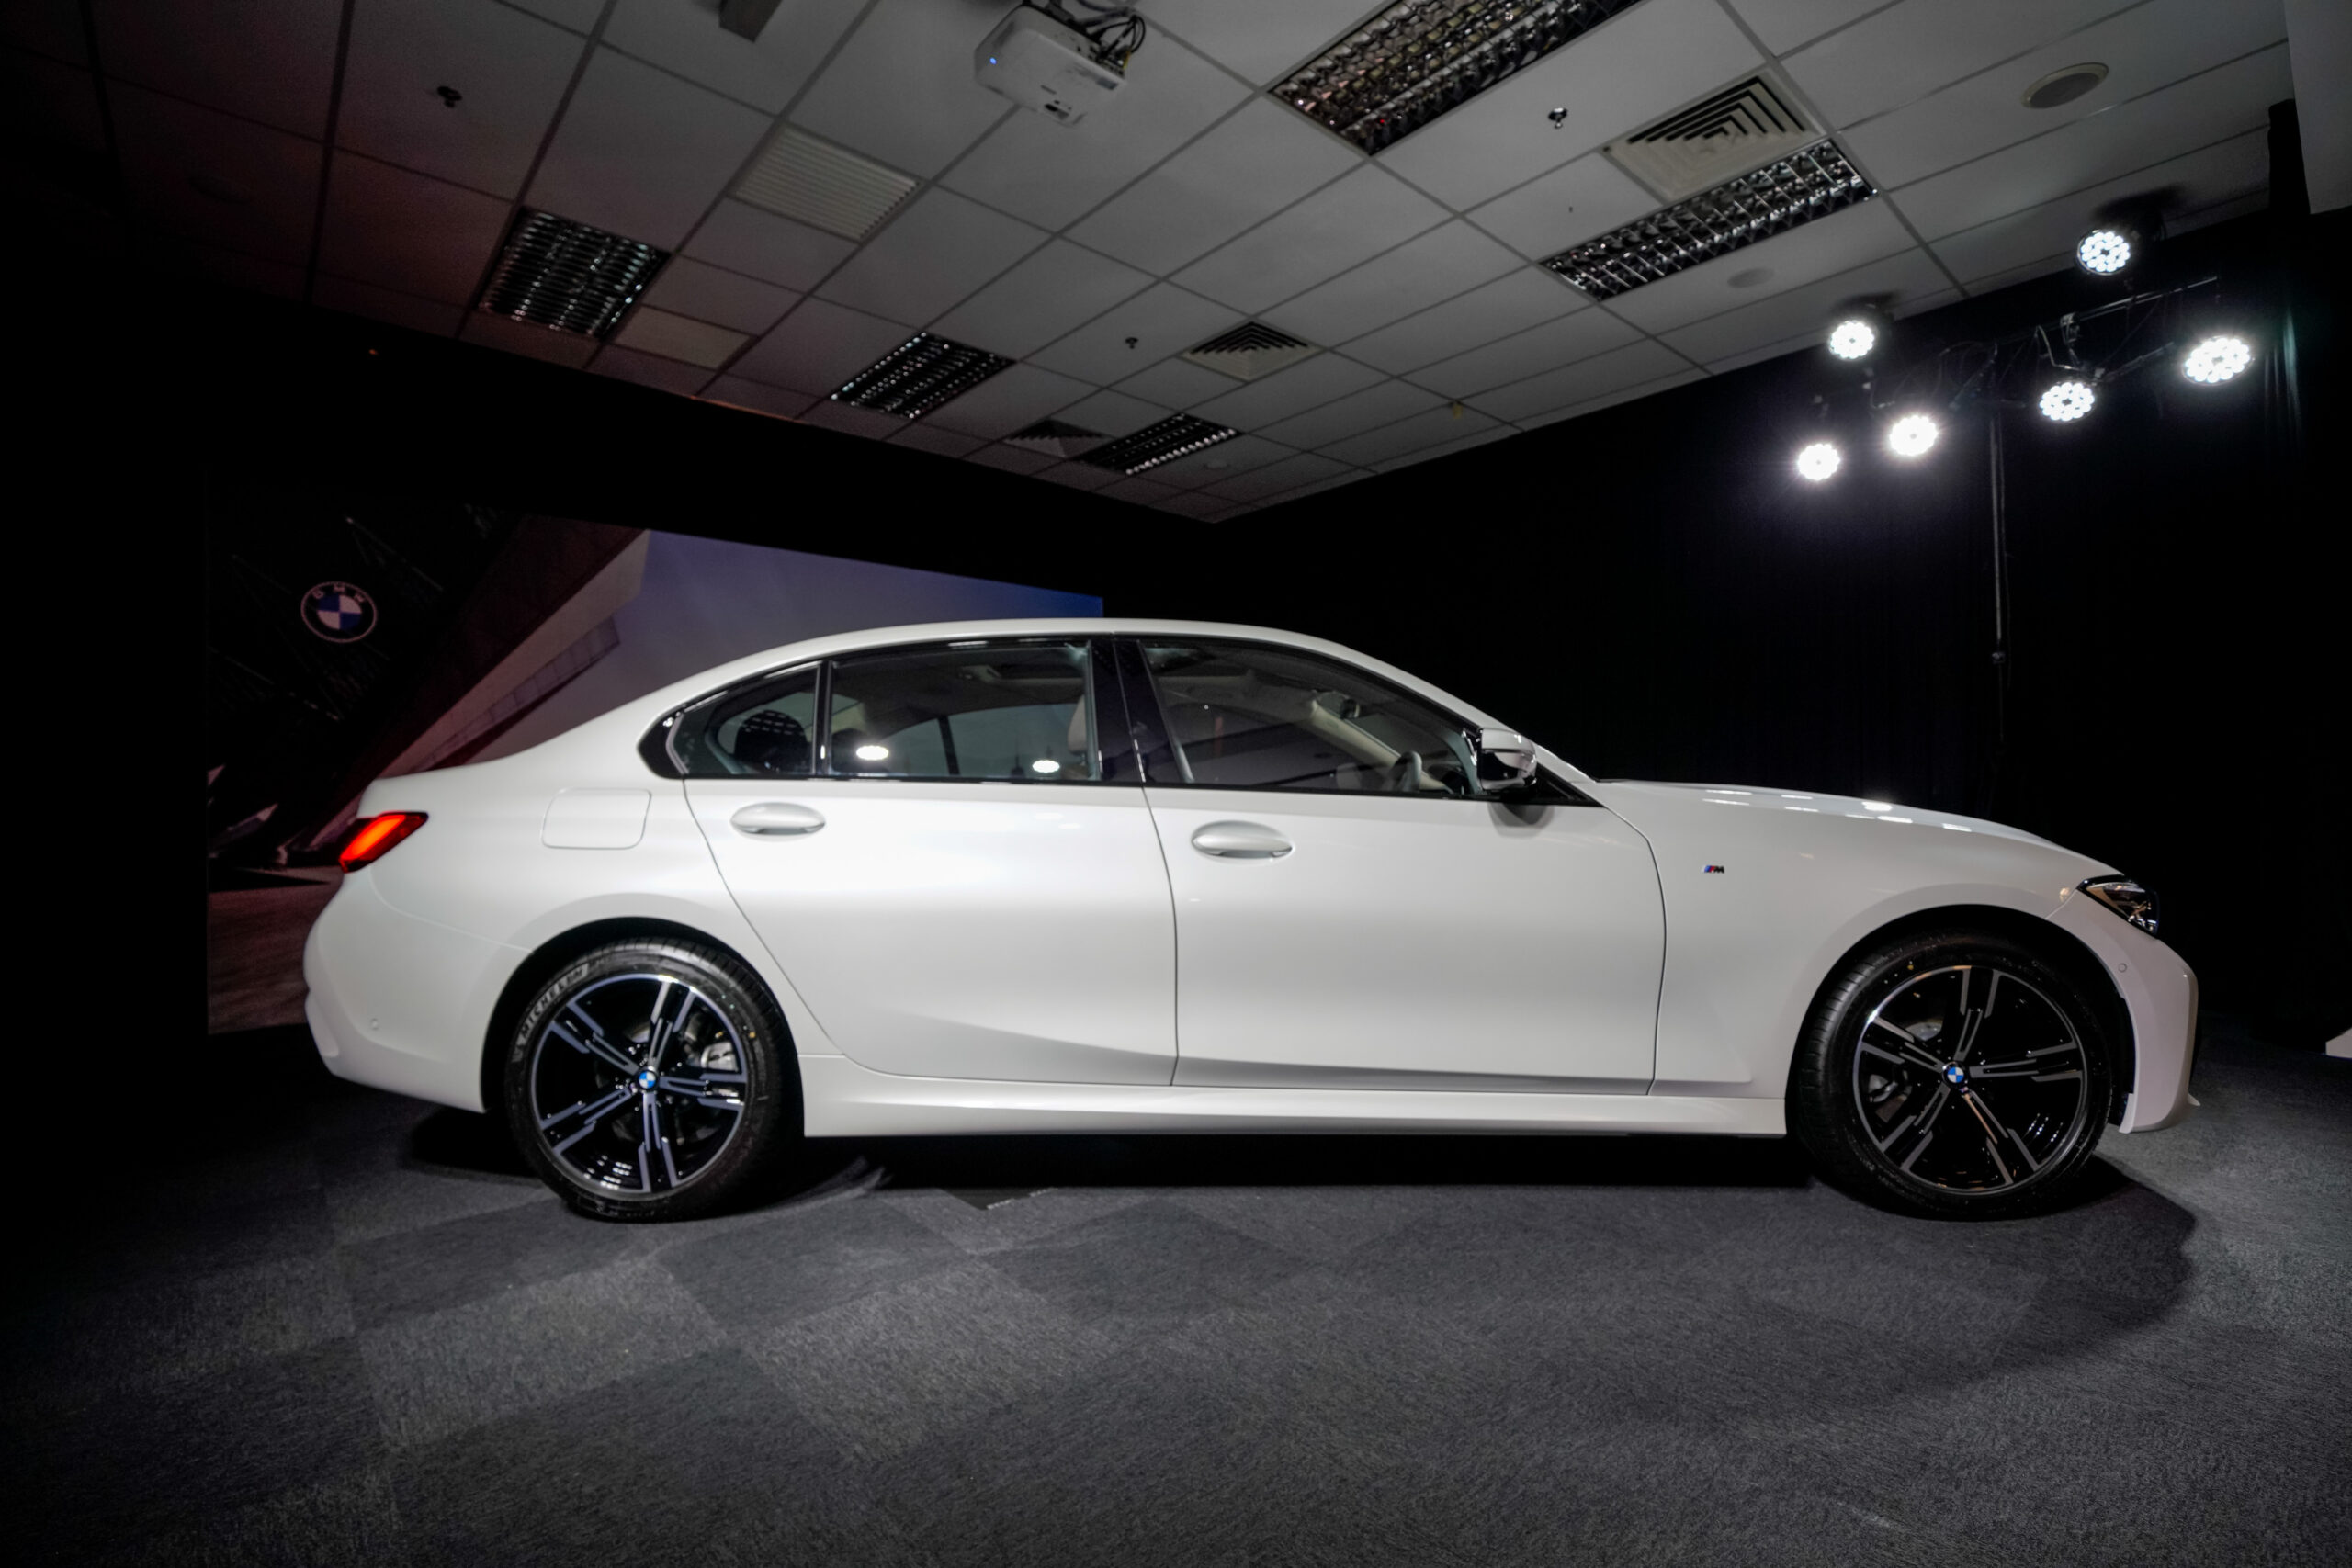 02. The First Ever BMW 330Li M Sport scaled